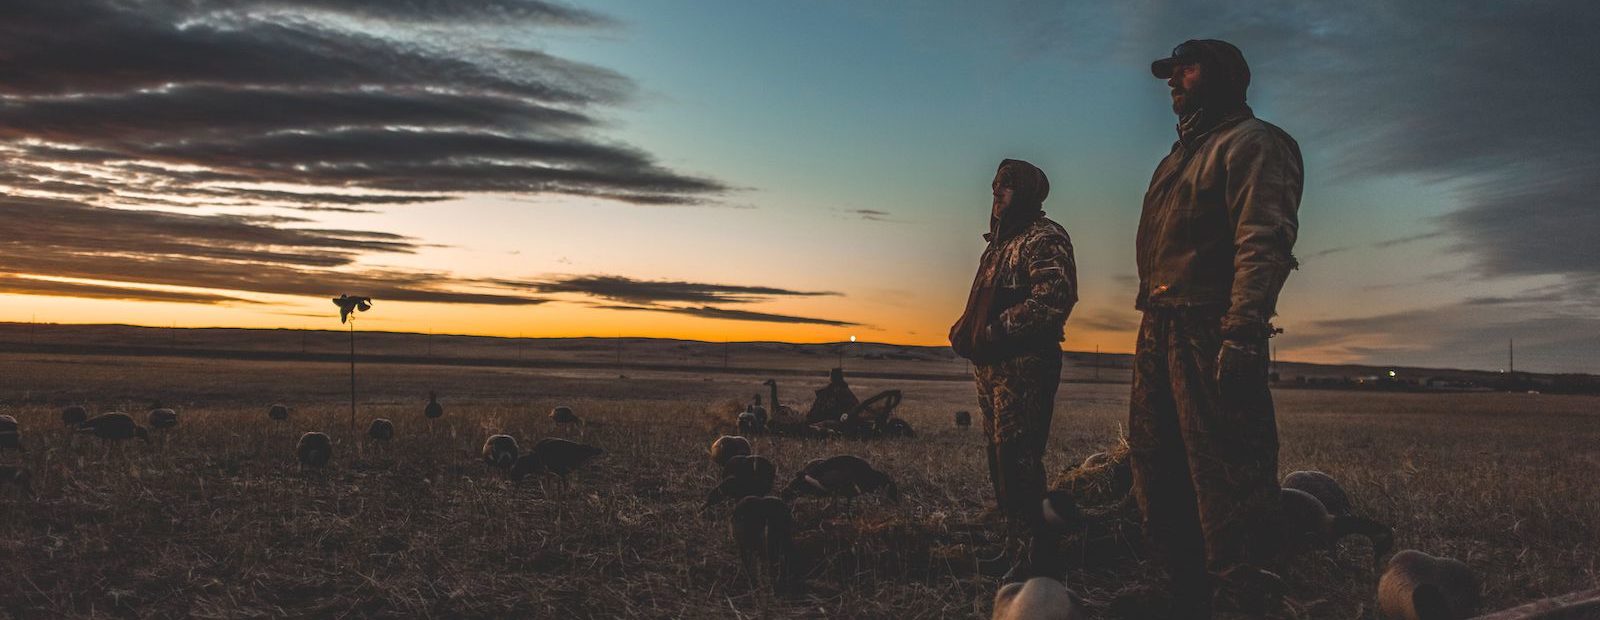 A pair of duck hunters looks across a field at sunrise